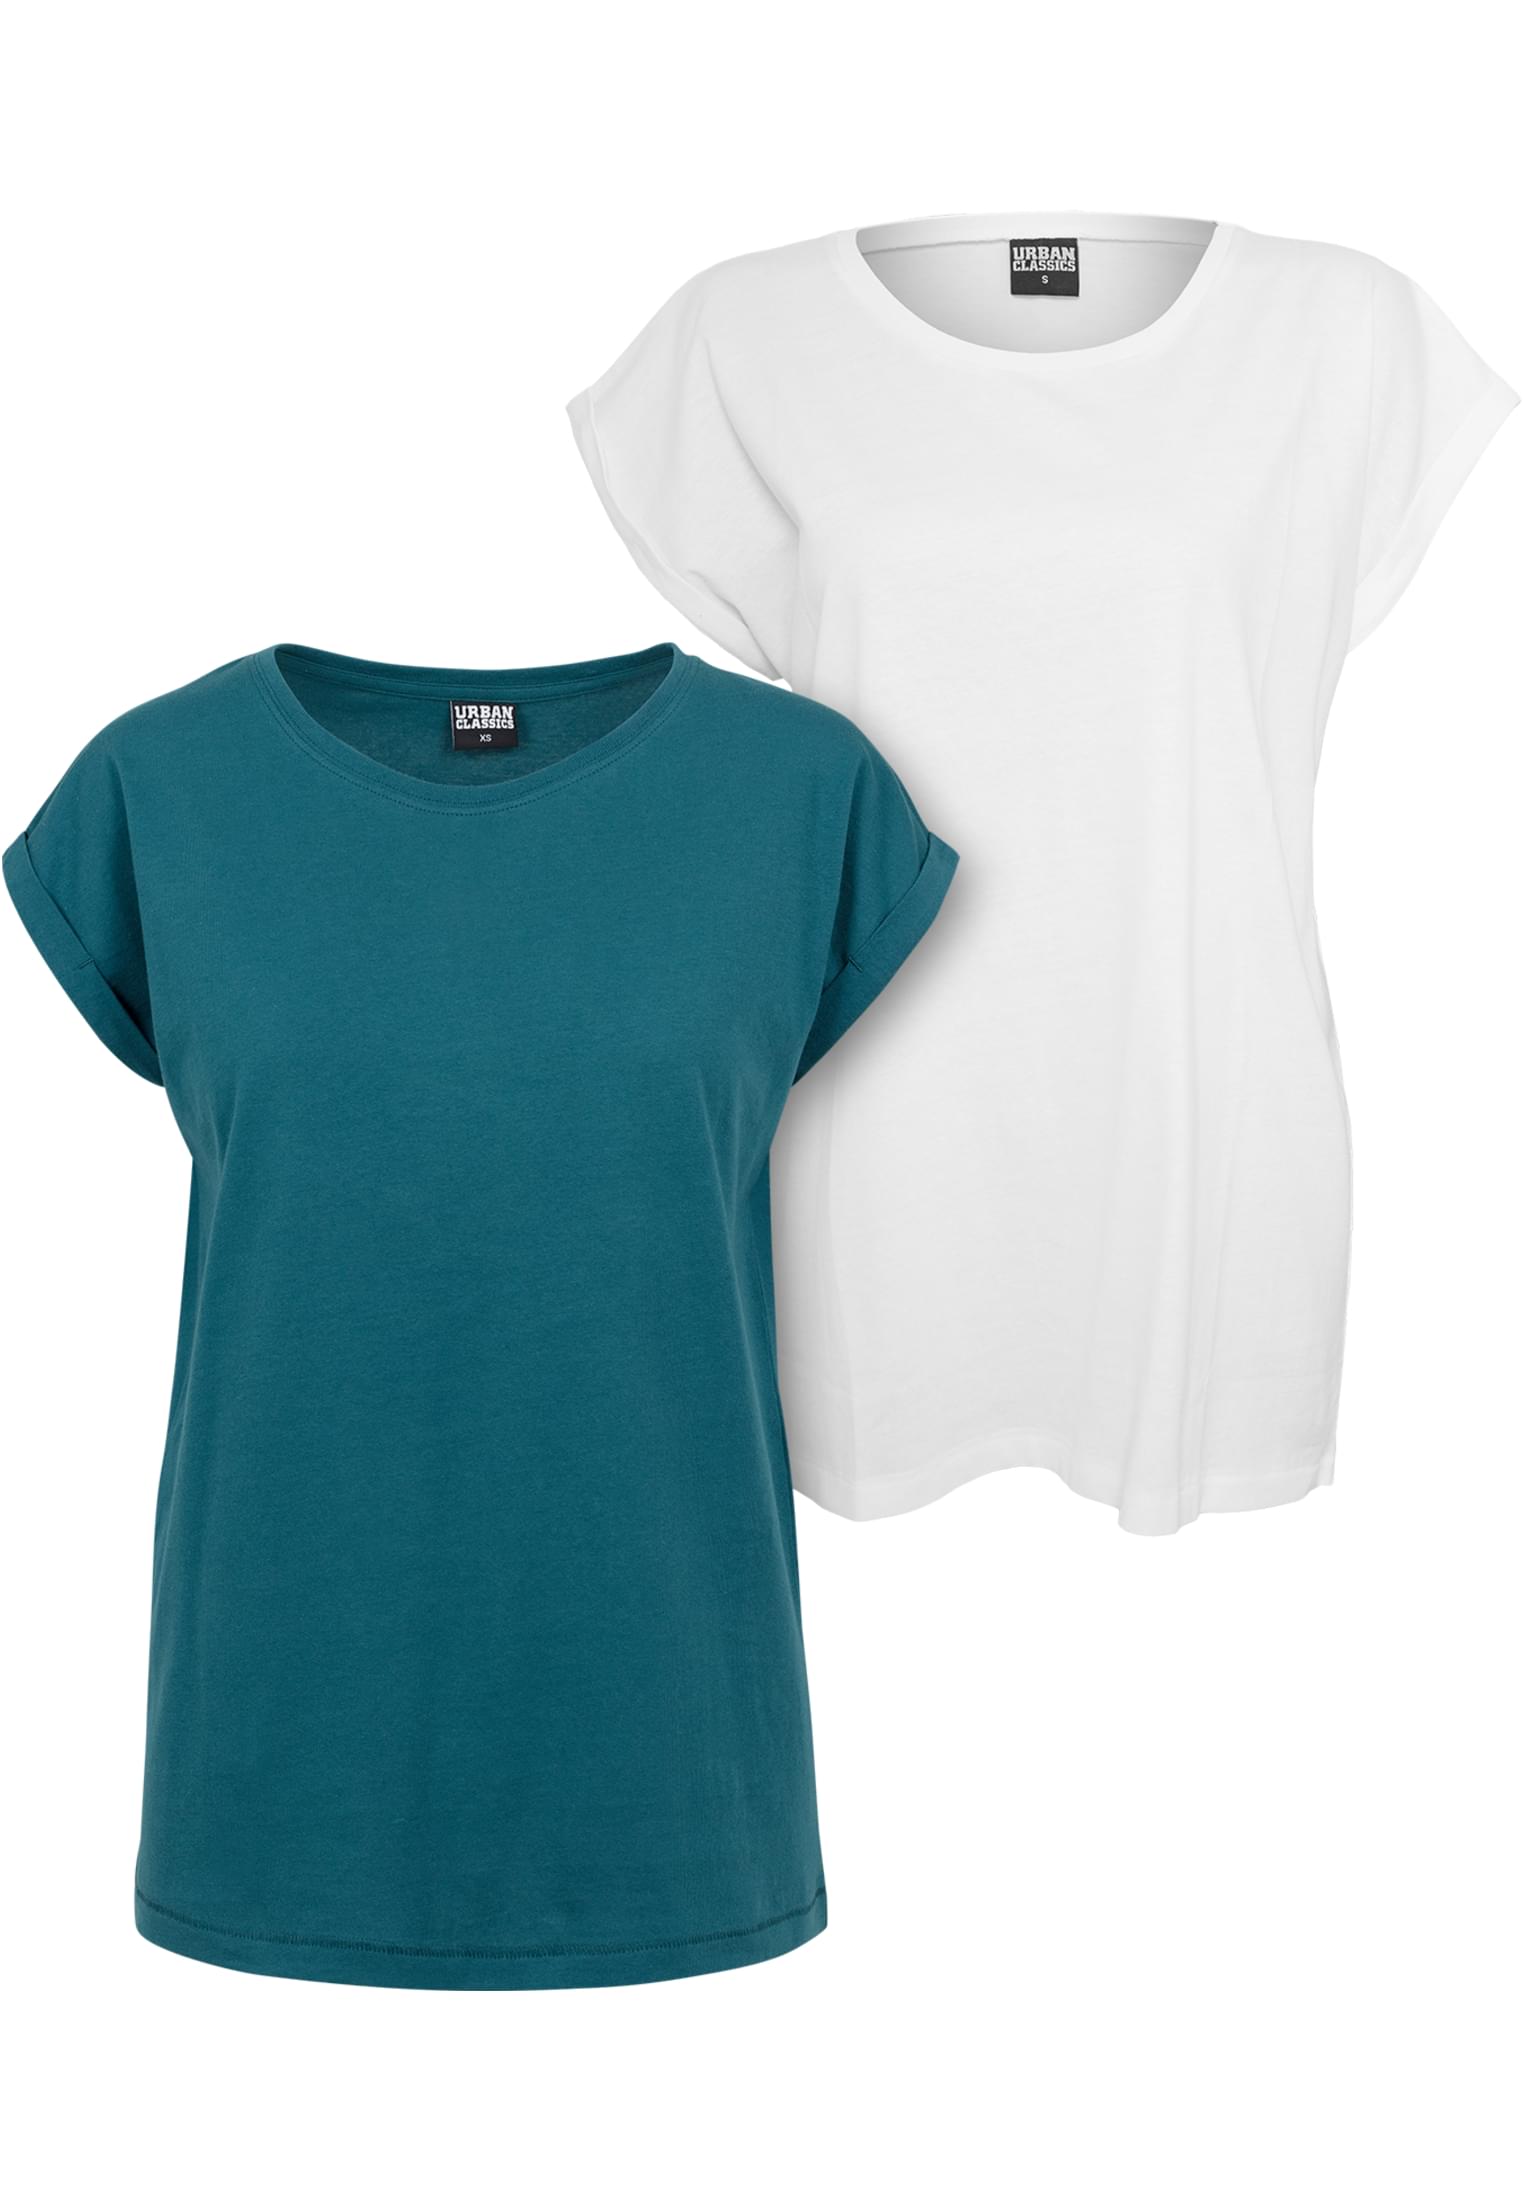 Women's T-shirt with extended shoulder 2-pack blue-green+white